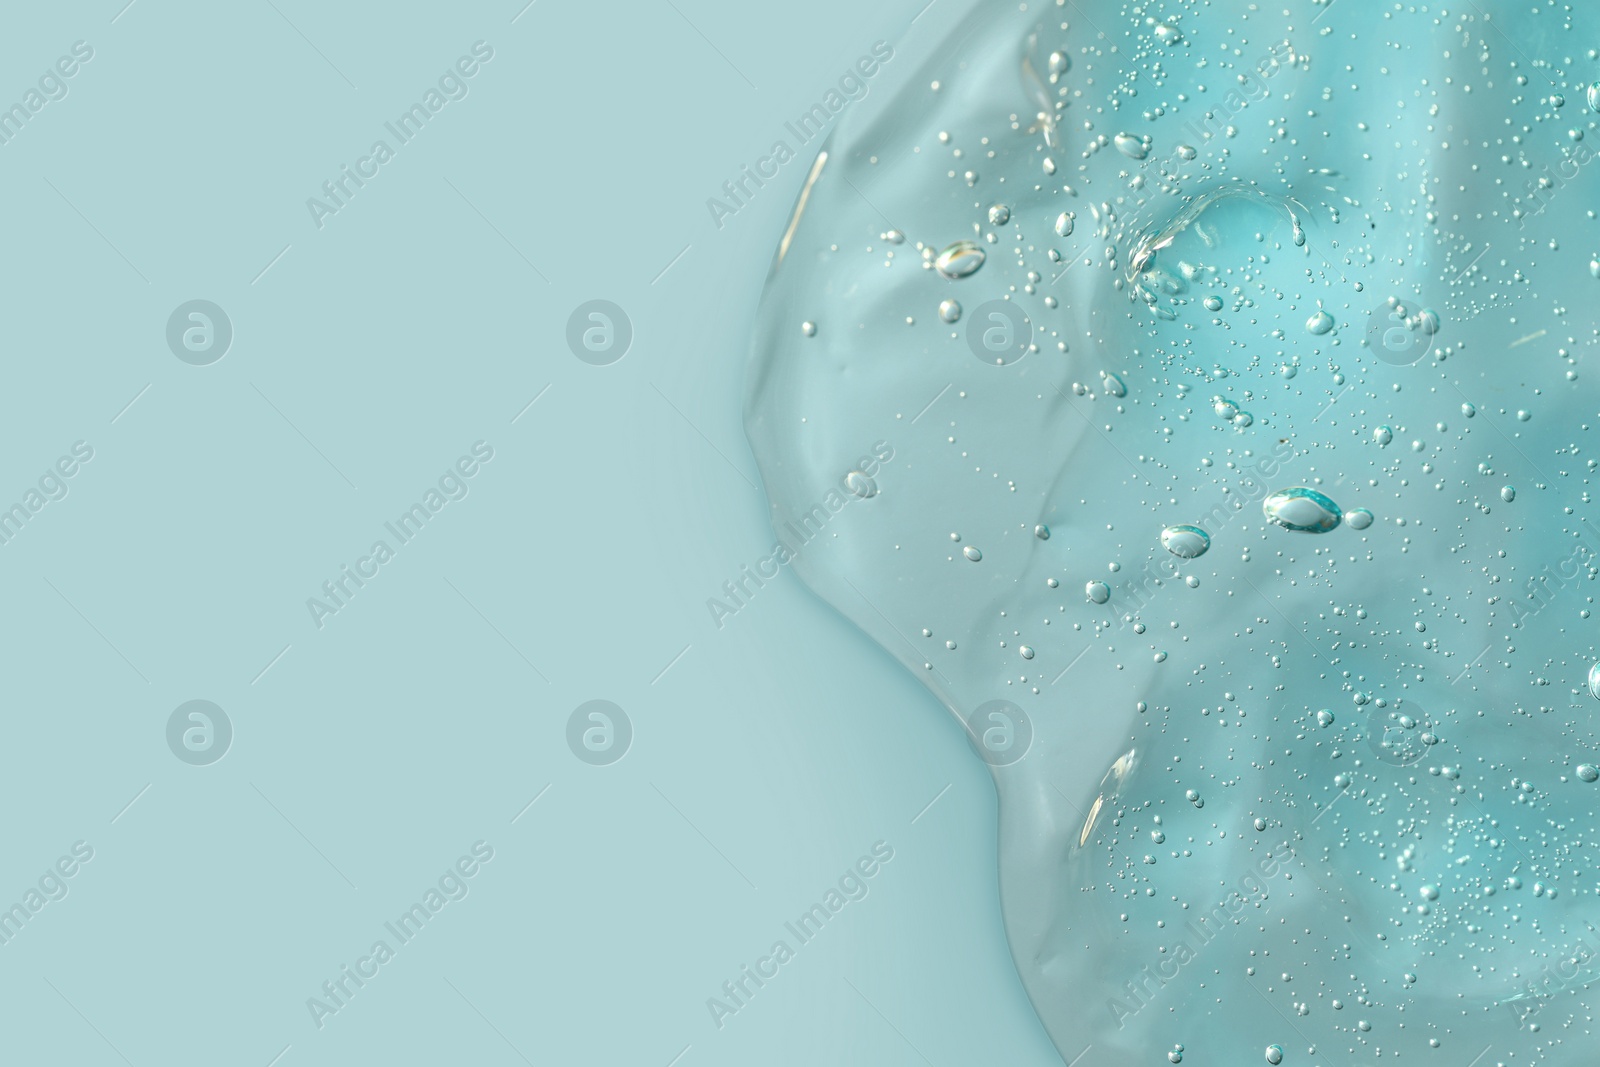 Photo of Transparent cleansing gel on light blue background, top view with space for text. Cosmetic product